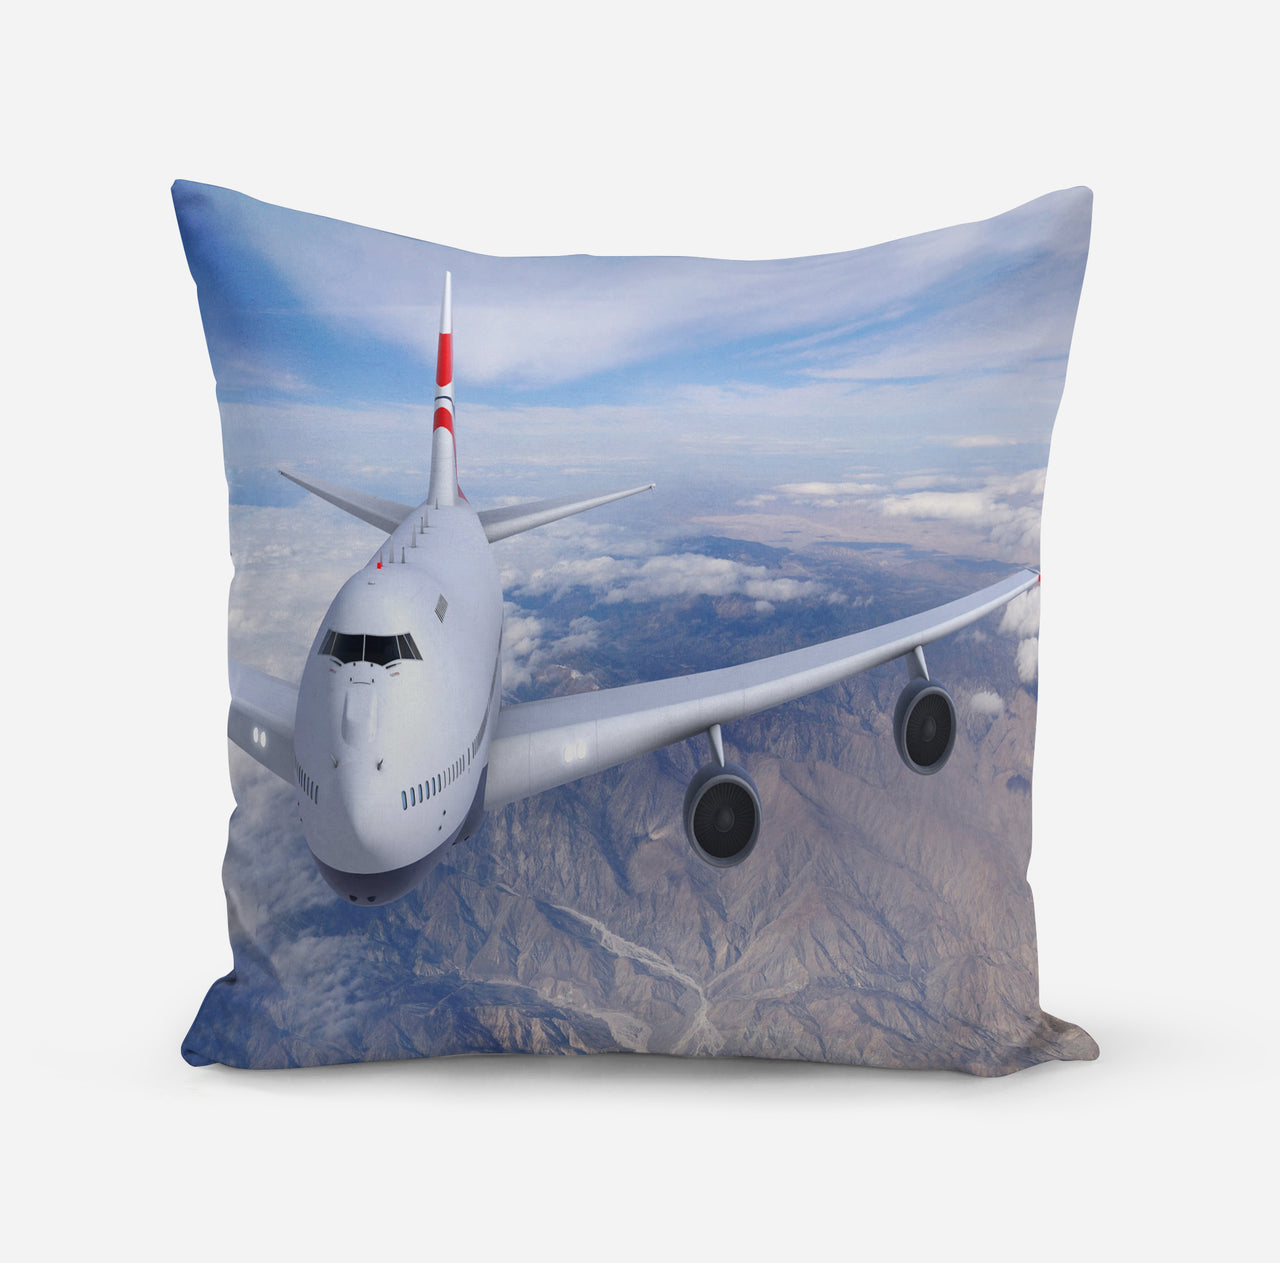 Graphical Boeing 747 Designed Pillows